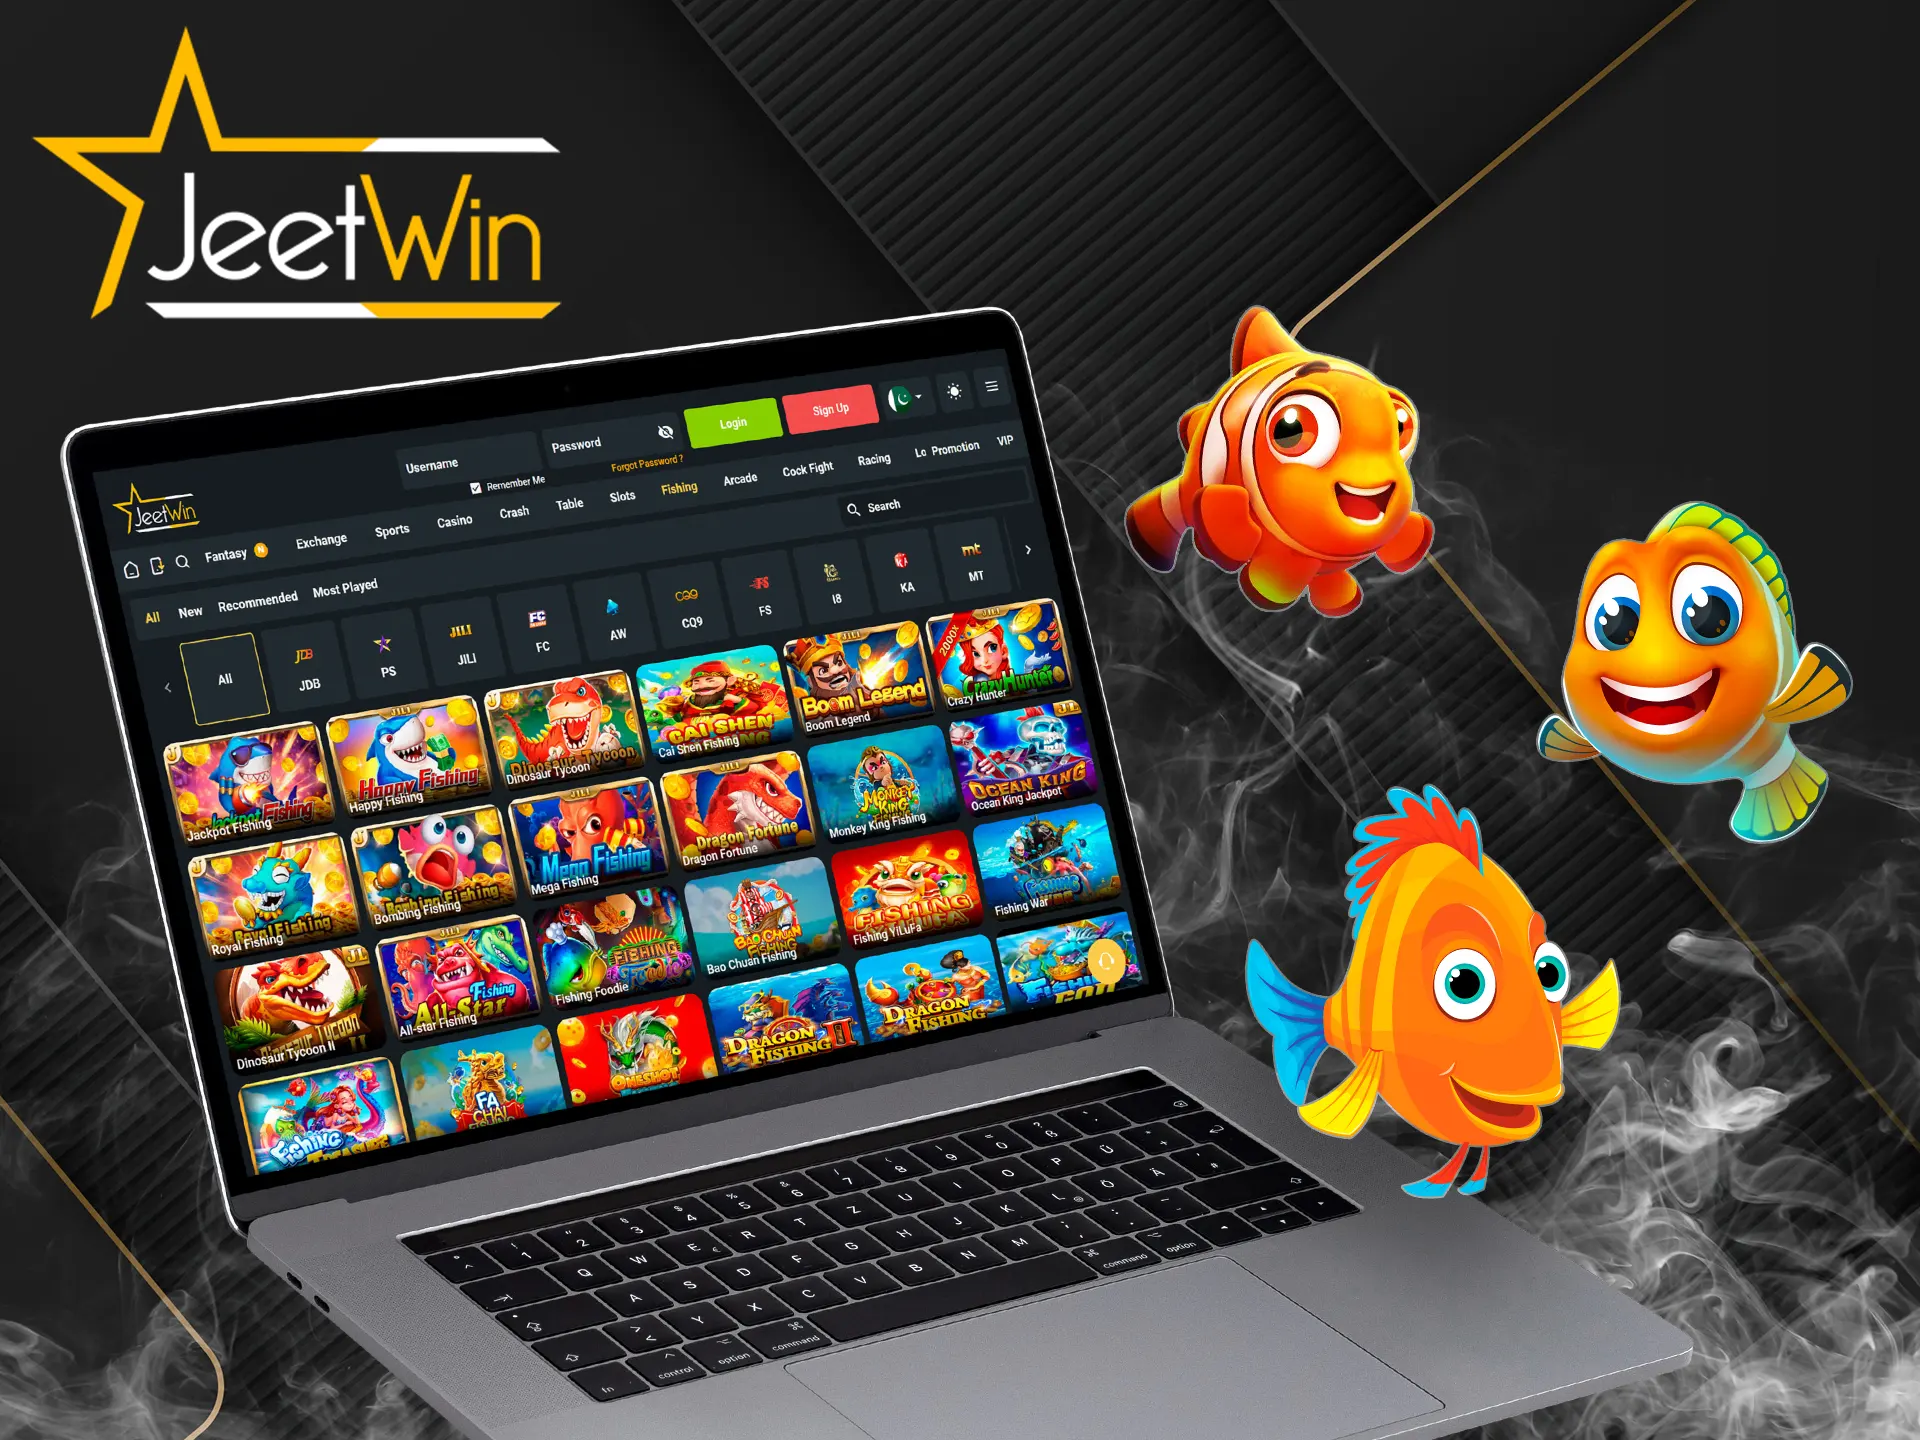 Become part of the beautiful underwater world by playing fishing games at JeetWin.